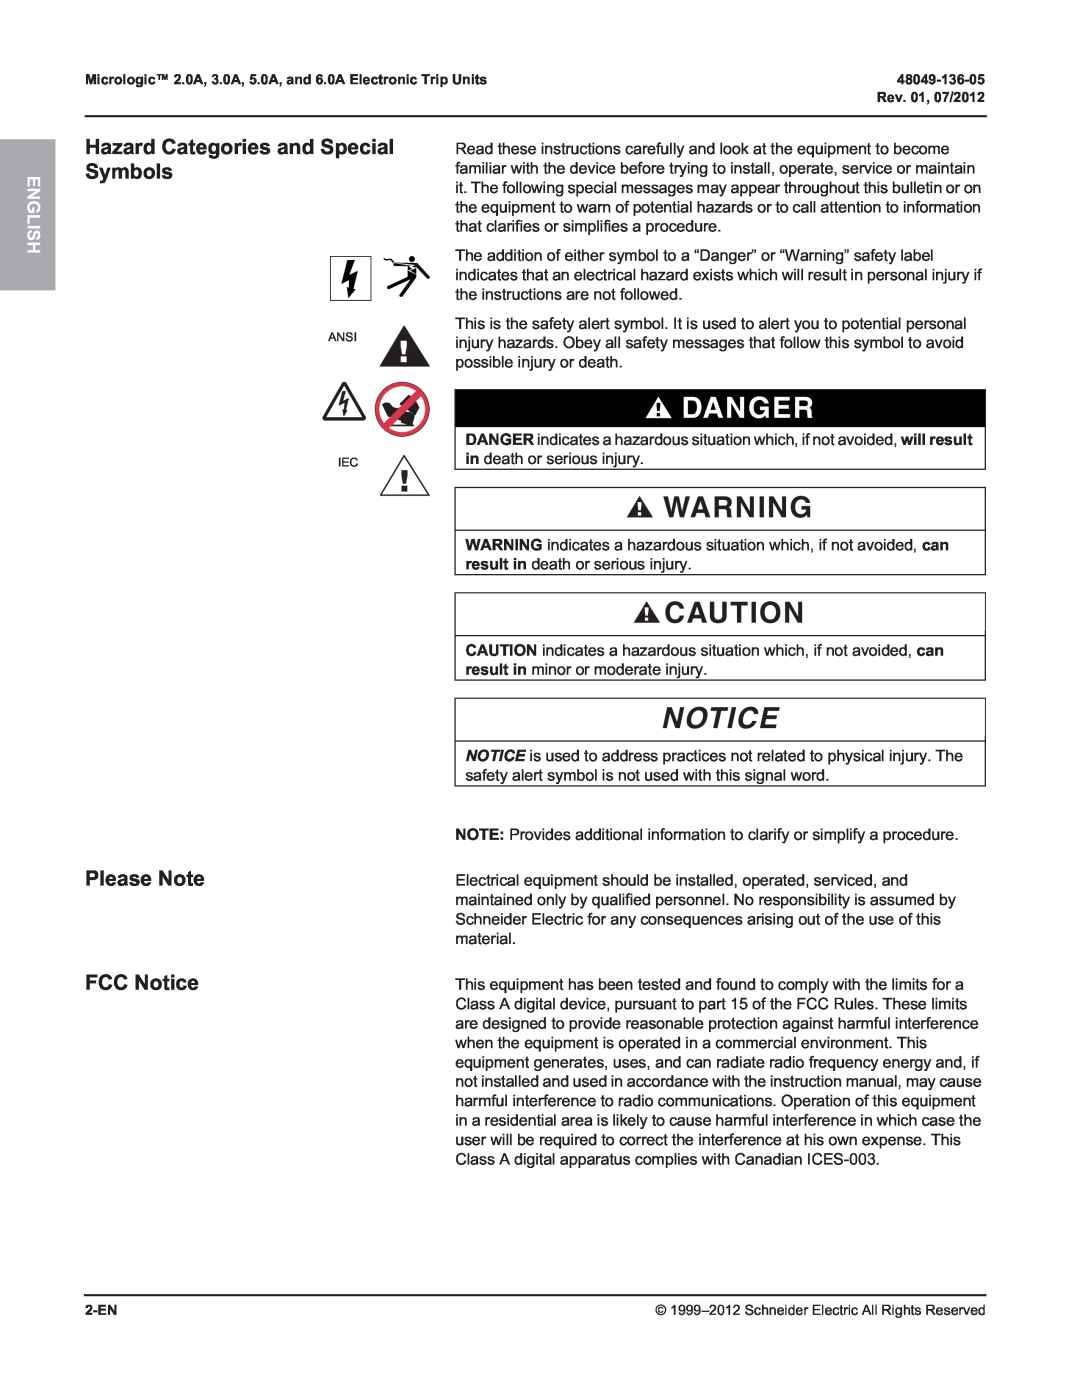 Schneider Electric 3.0A Danger, Hazard Categories and Special Symbols, Please Note, FCC Notice, in death or serious injury 